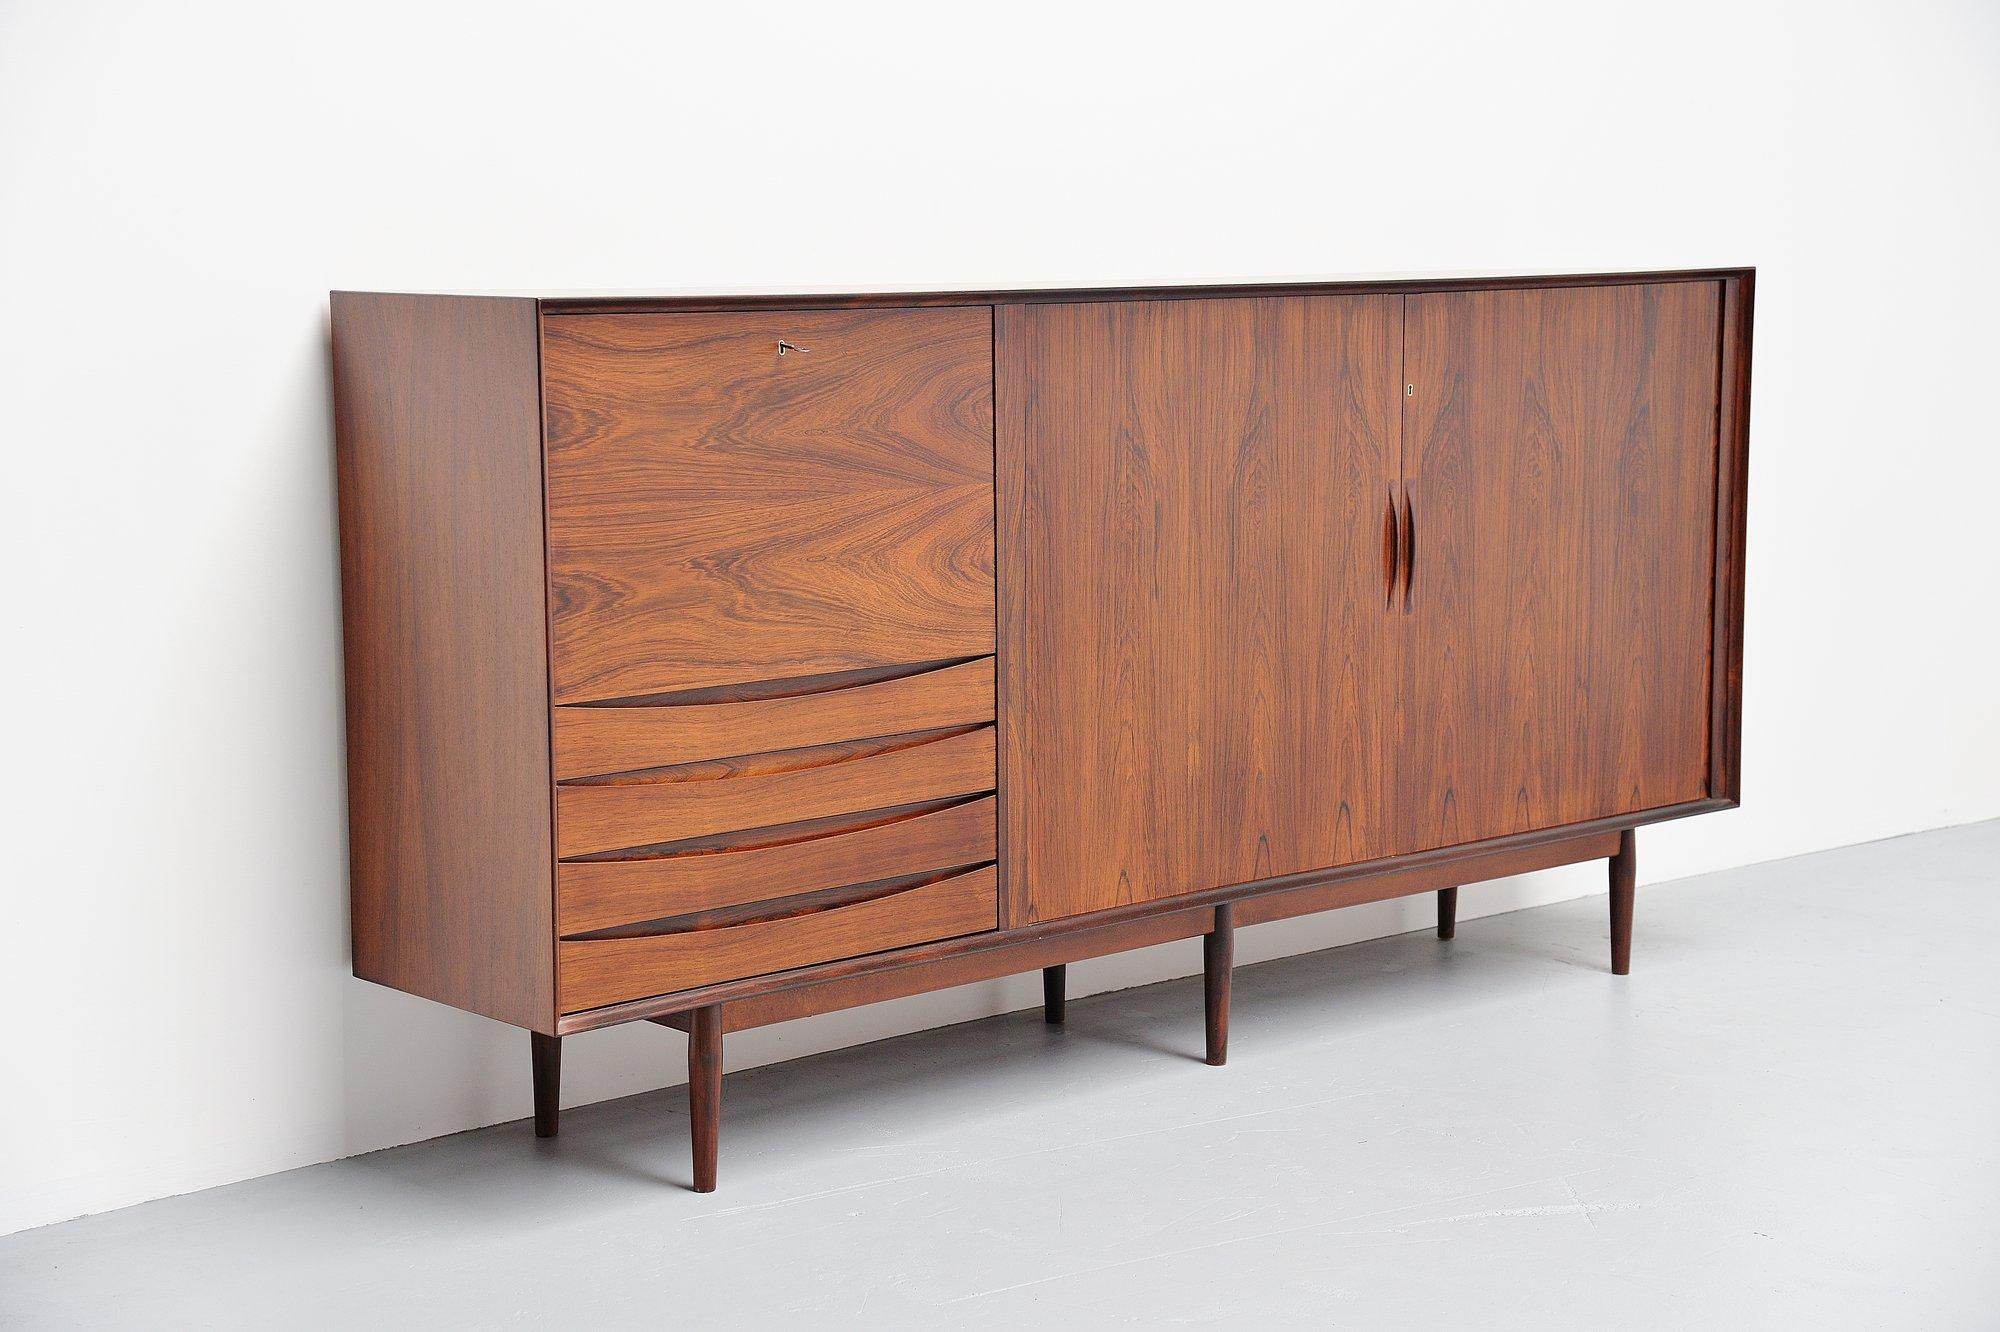 Superb quality rosewood highboard designed by Arne Vodder, manufactured by Sibast Mobler, Denmark 1960. This highboard has amazing storage oppertunities. It has 2 large tambour doors on the right with several (adjustable) shelves behind and 3